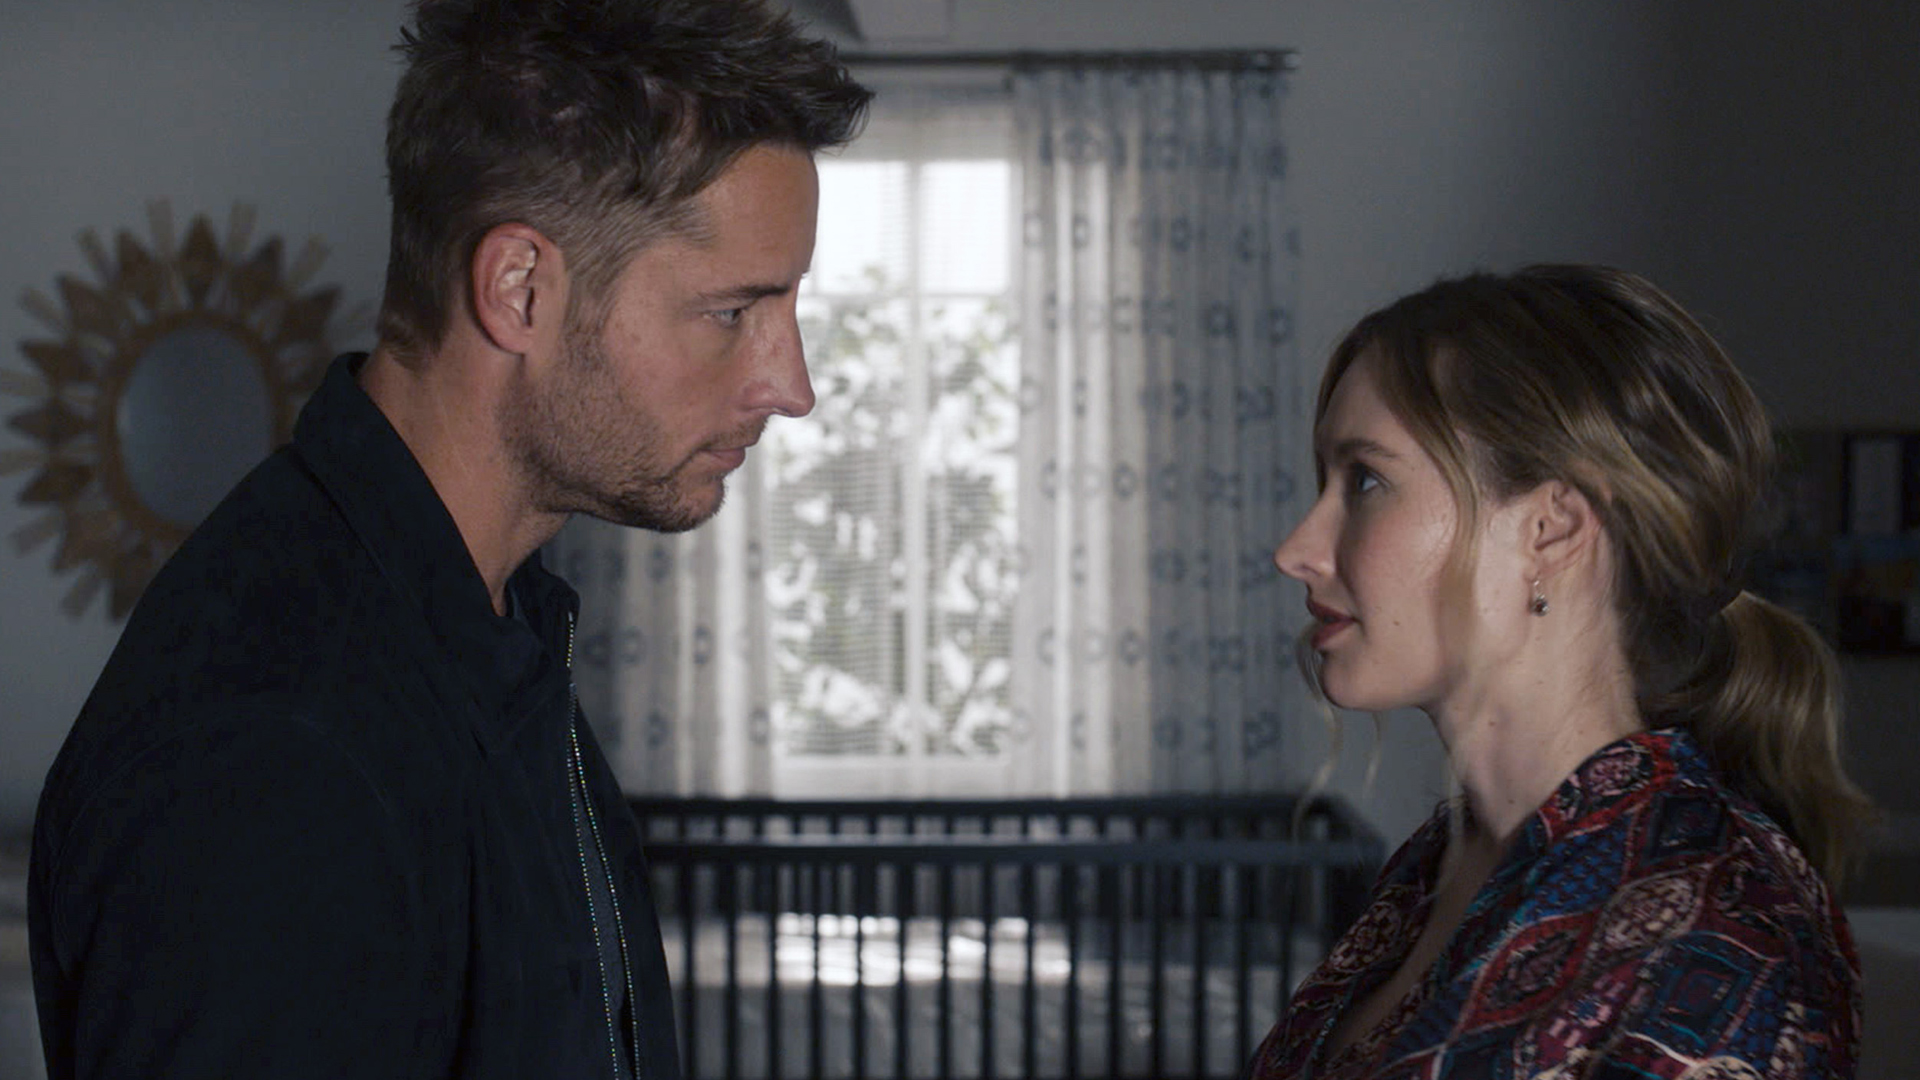 Justin Hartley as Kevin and Caitlin Thompson as Madison on 'This Is Us' Season 5 Episode 5 in 2021